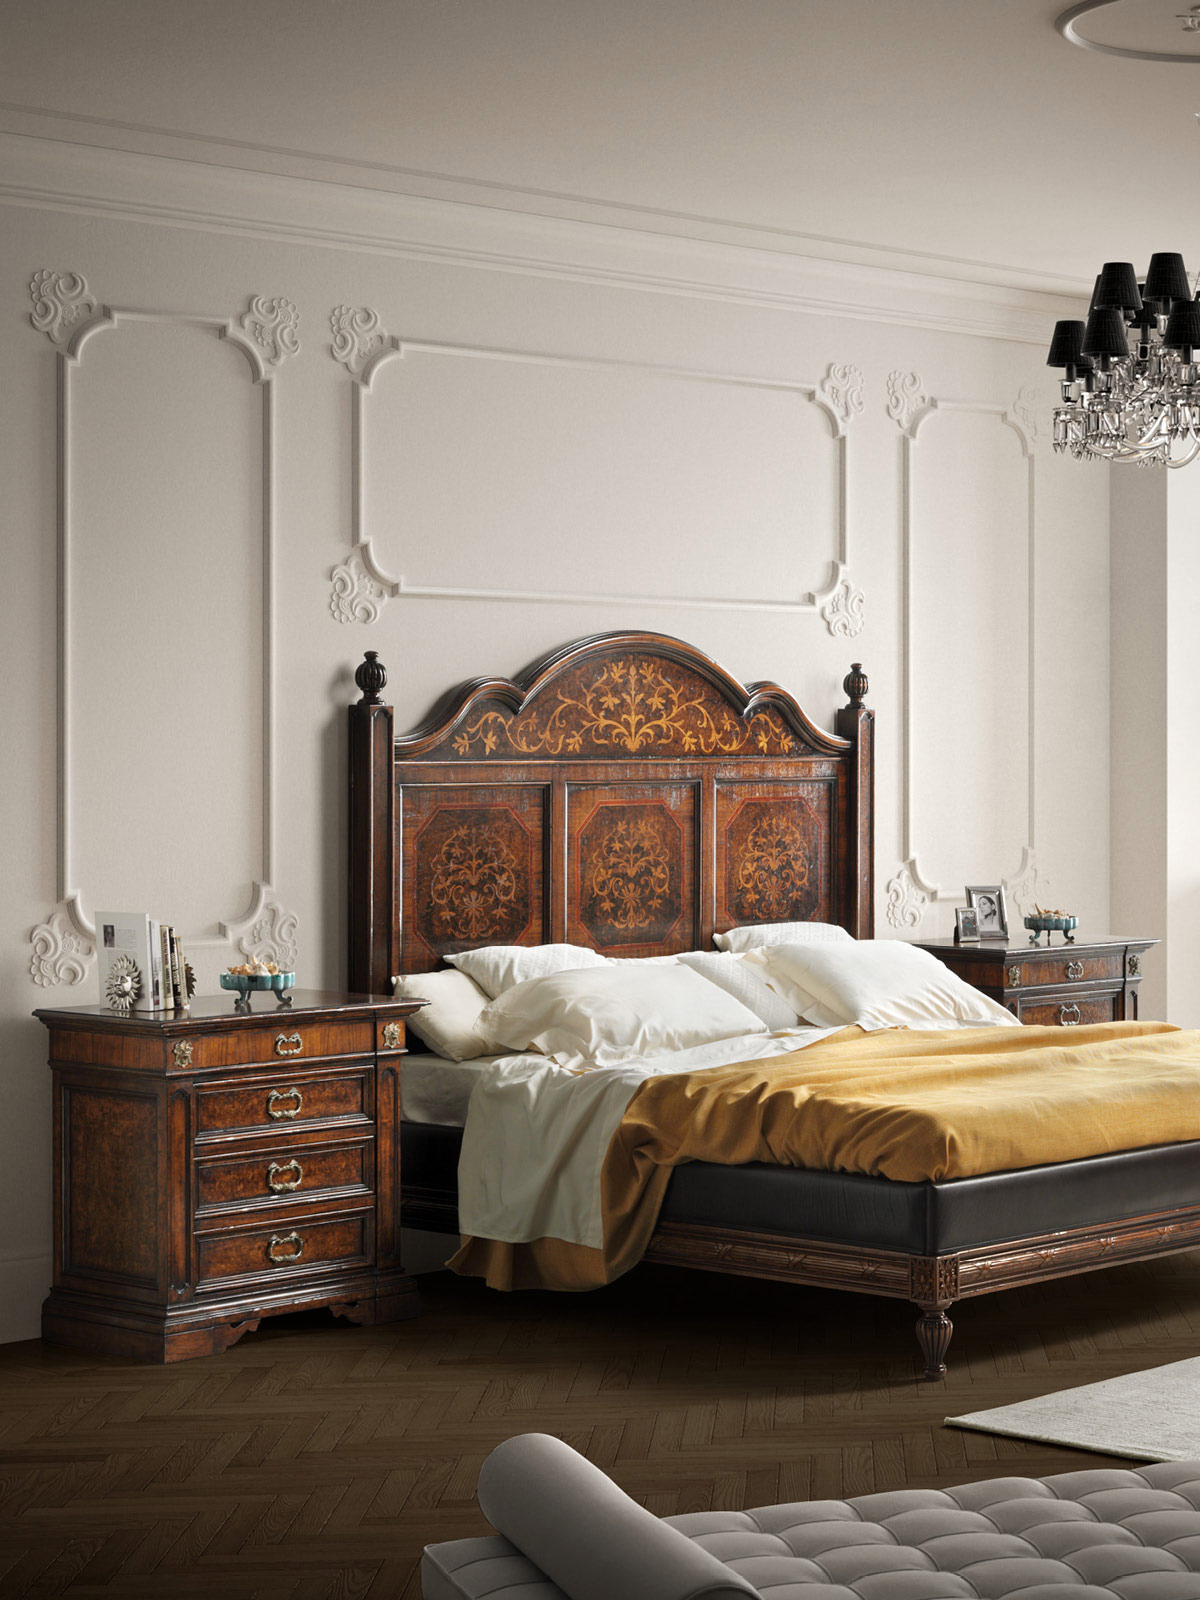 King Size Bed Mod. 673 – 213 x 220 cm / Nightstand Mod. 675 – 87 x 54 h 86 cm